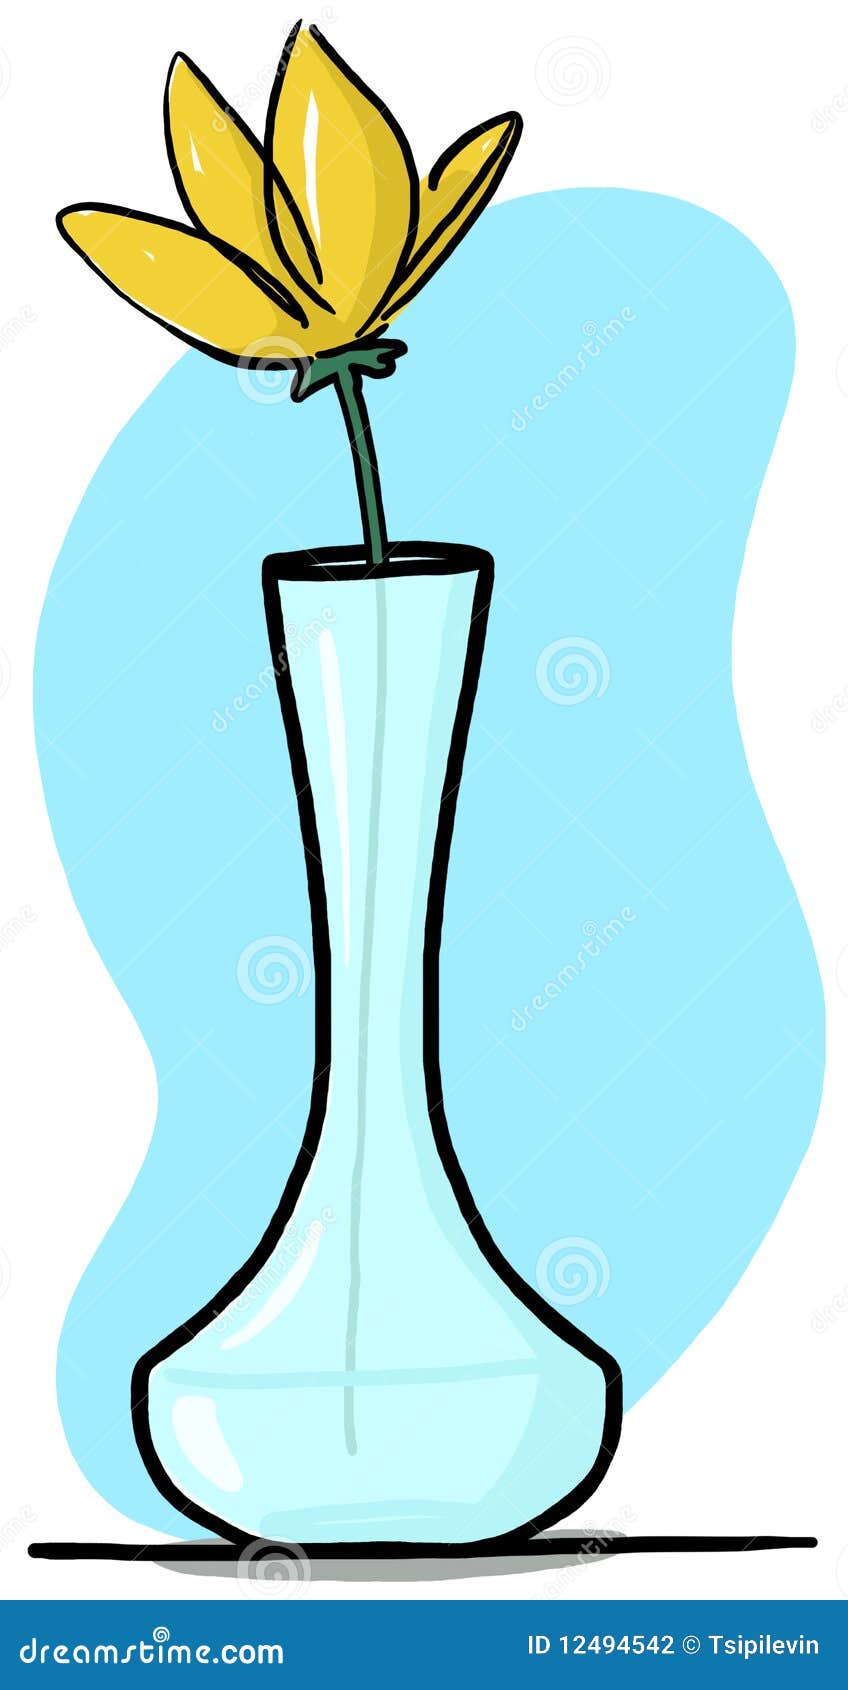 10 Flower Vase Cartoon Images Top Collection Of Different Types